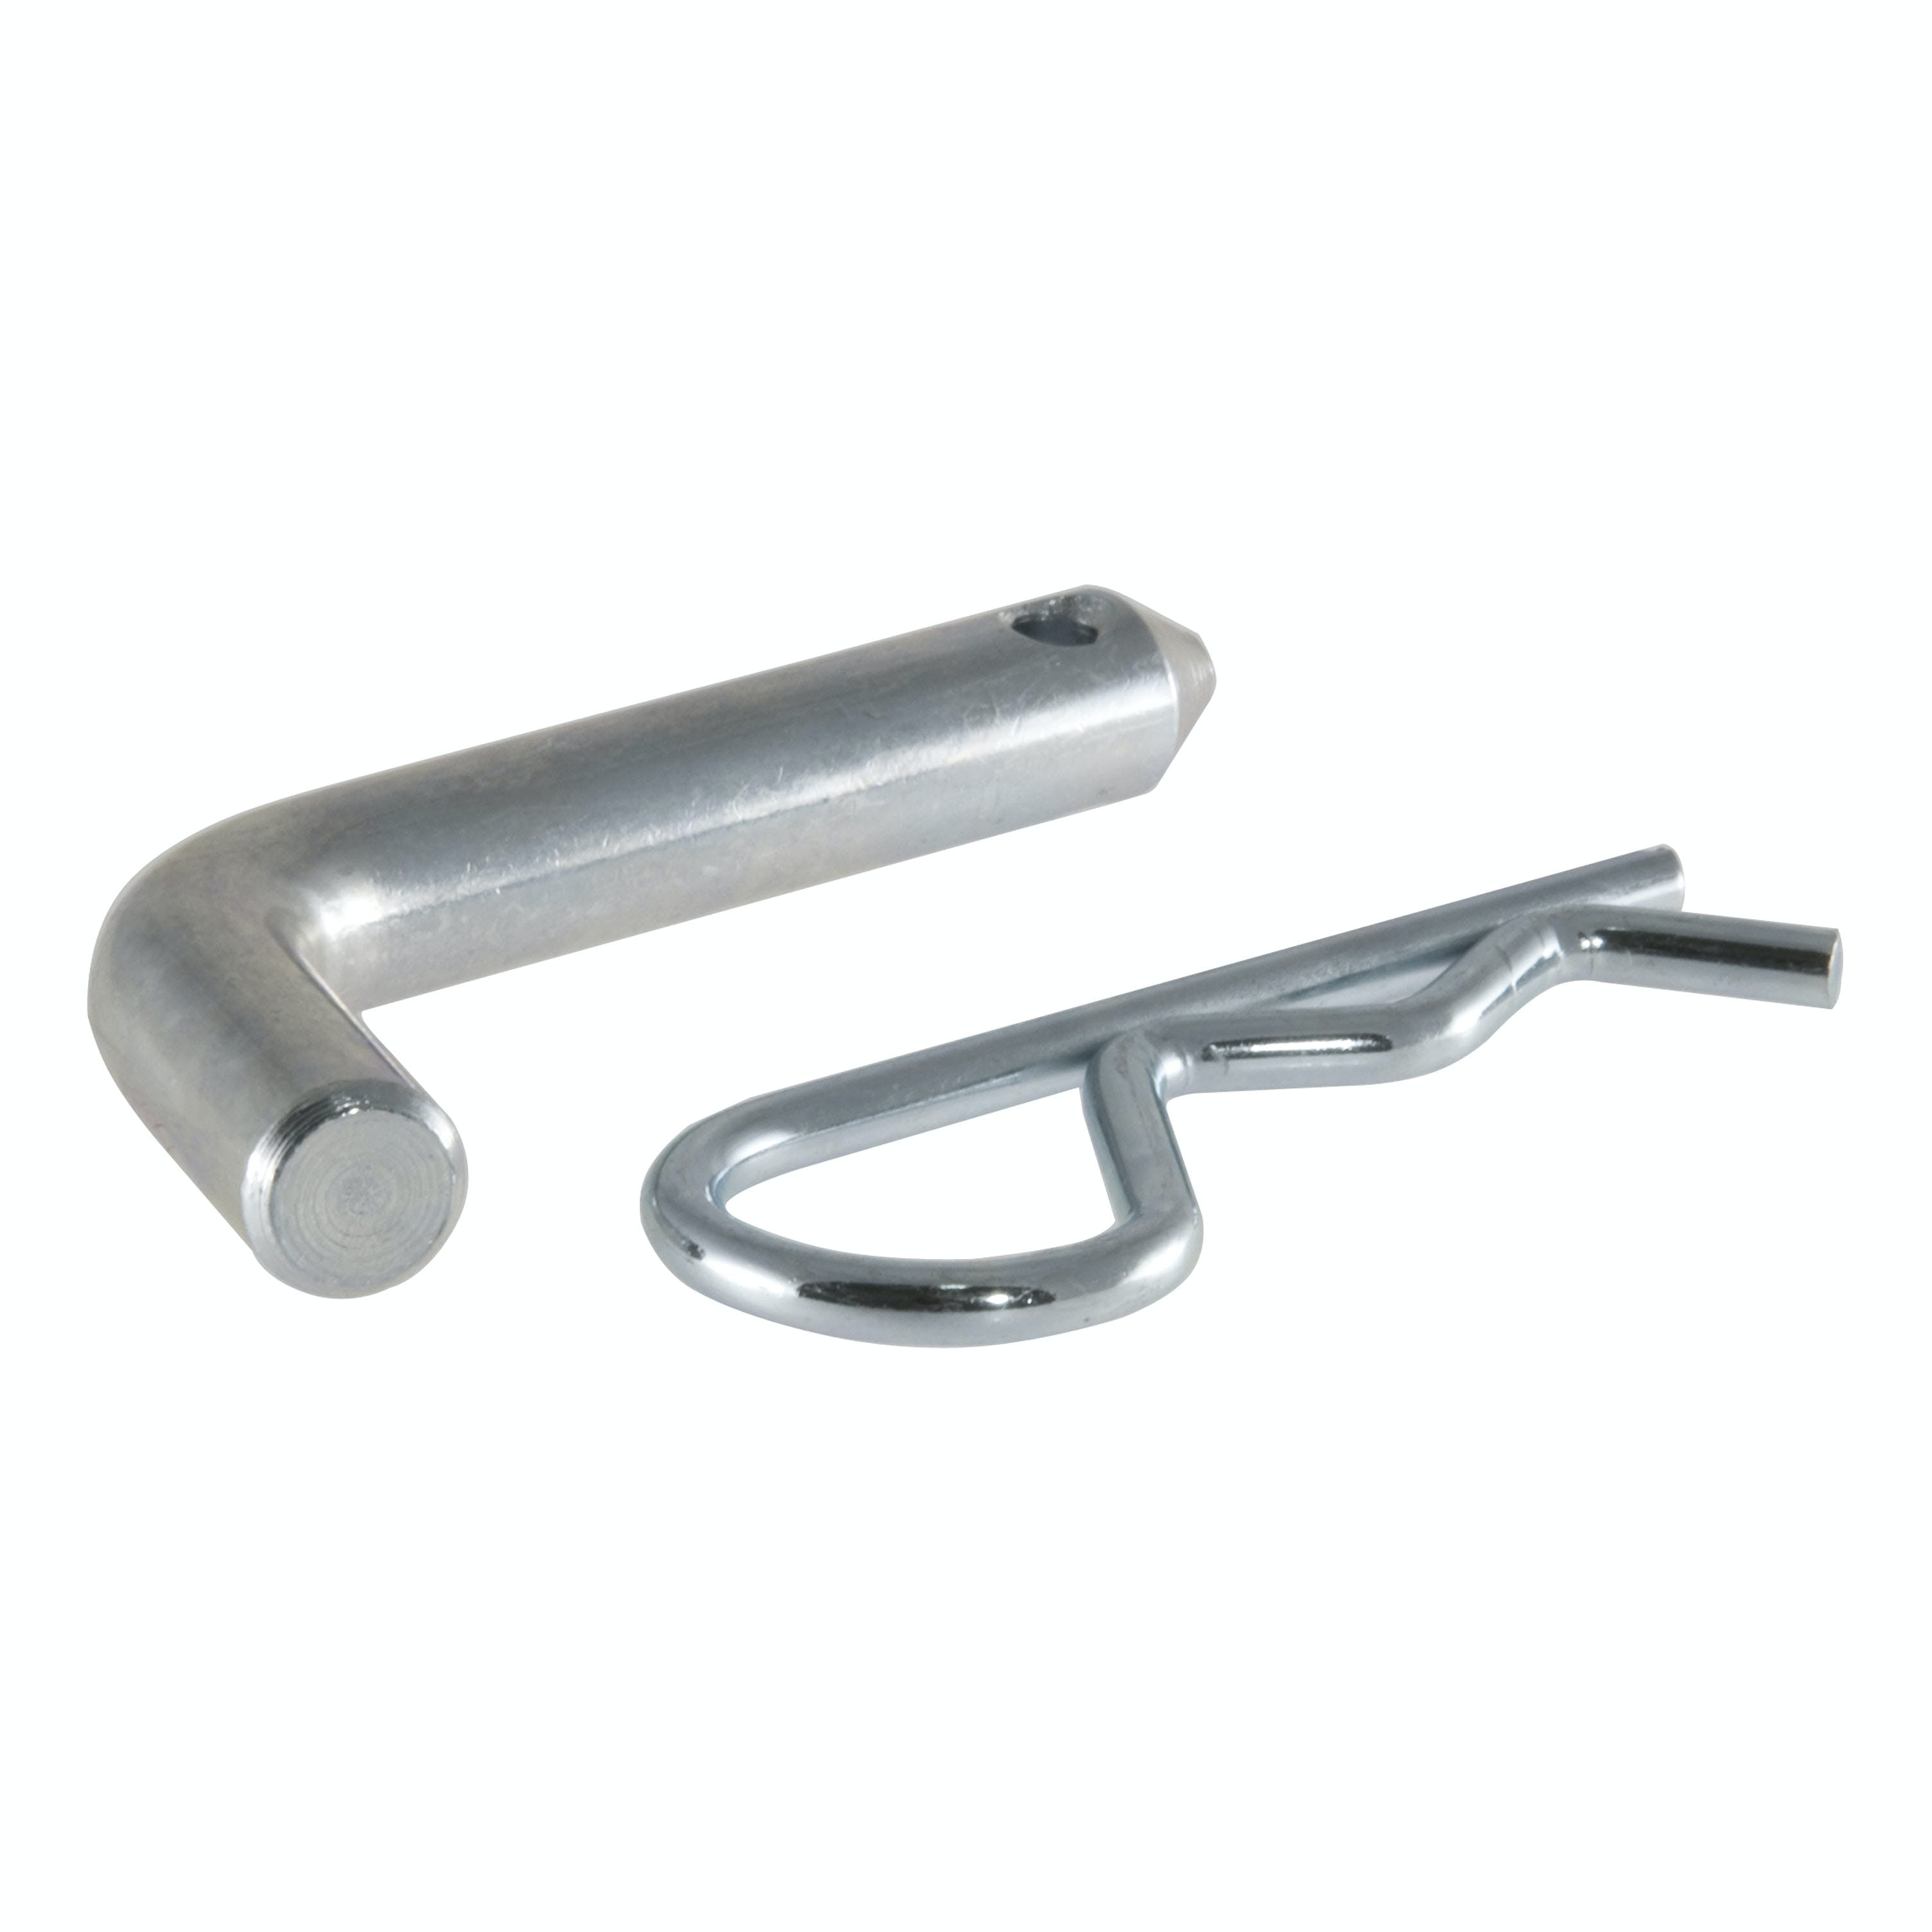 CURT 21401 1/2 Hitch Pin (1-1/4 Receiver, Zinc, Packaged)